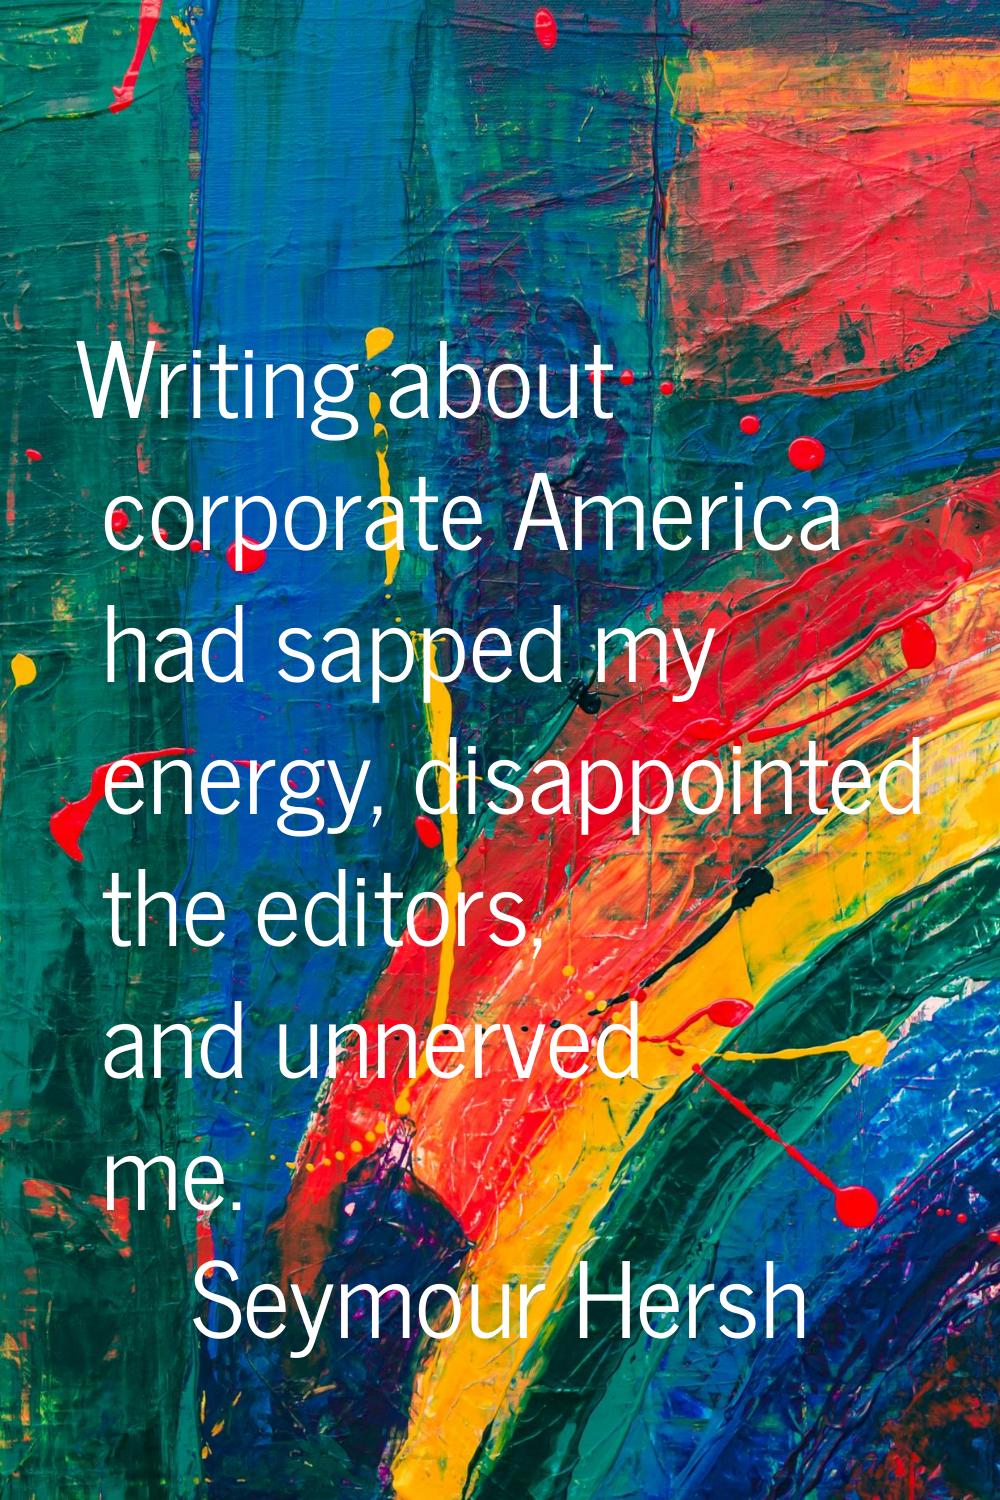 Writing about corporate America had sapped my energy, disappointed the editors, and unnerved me.